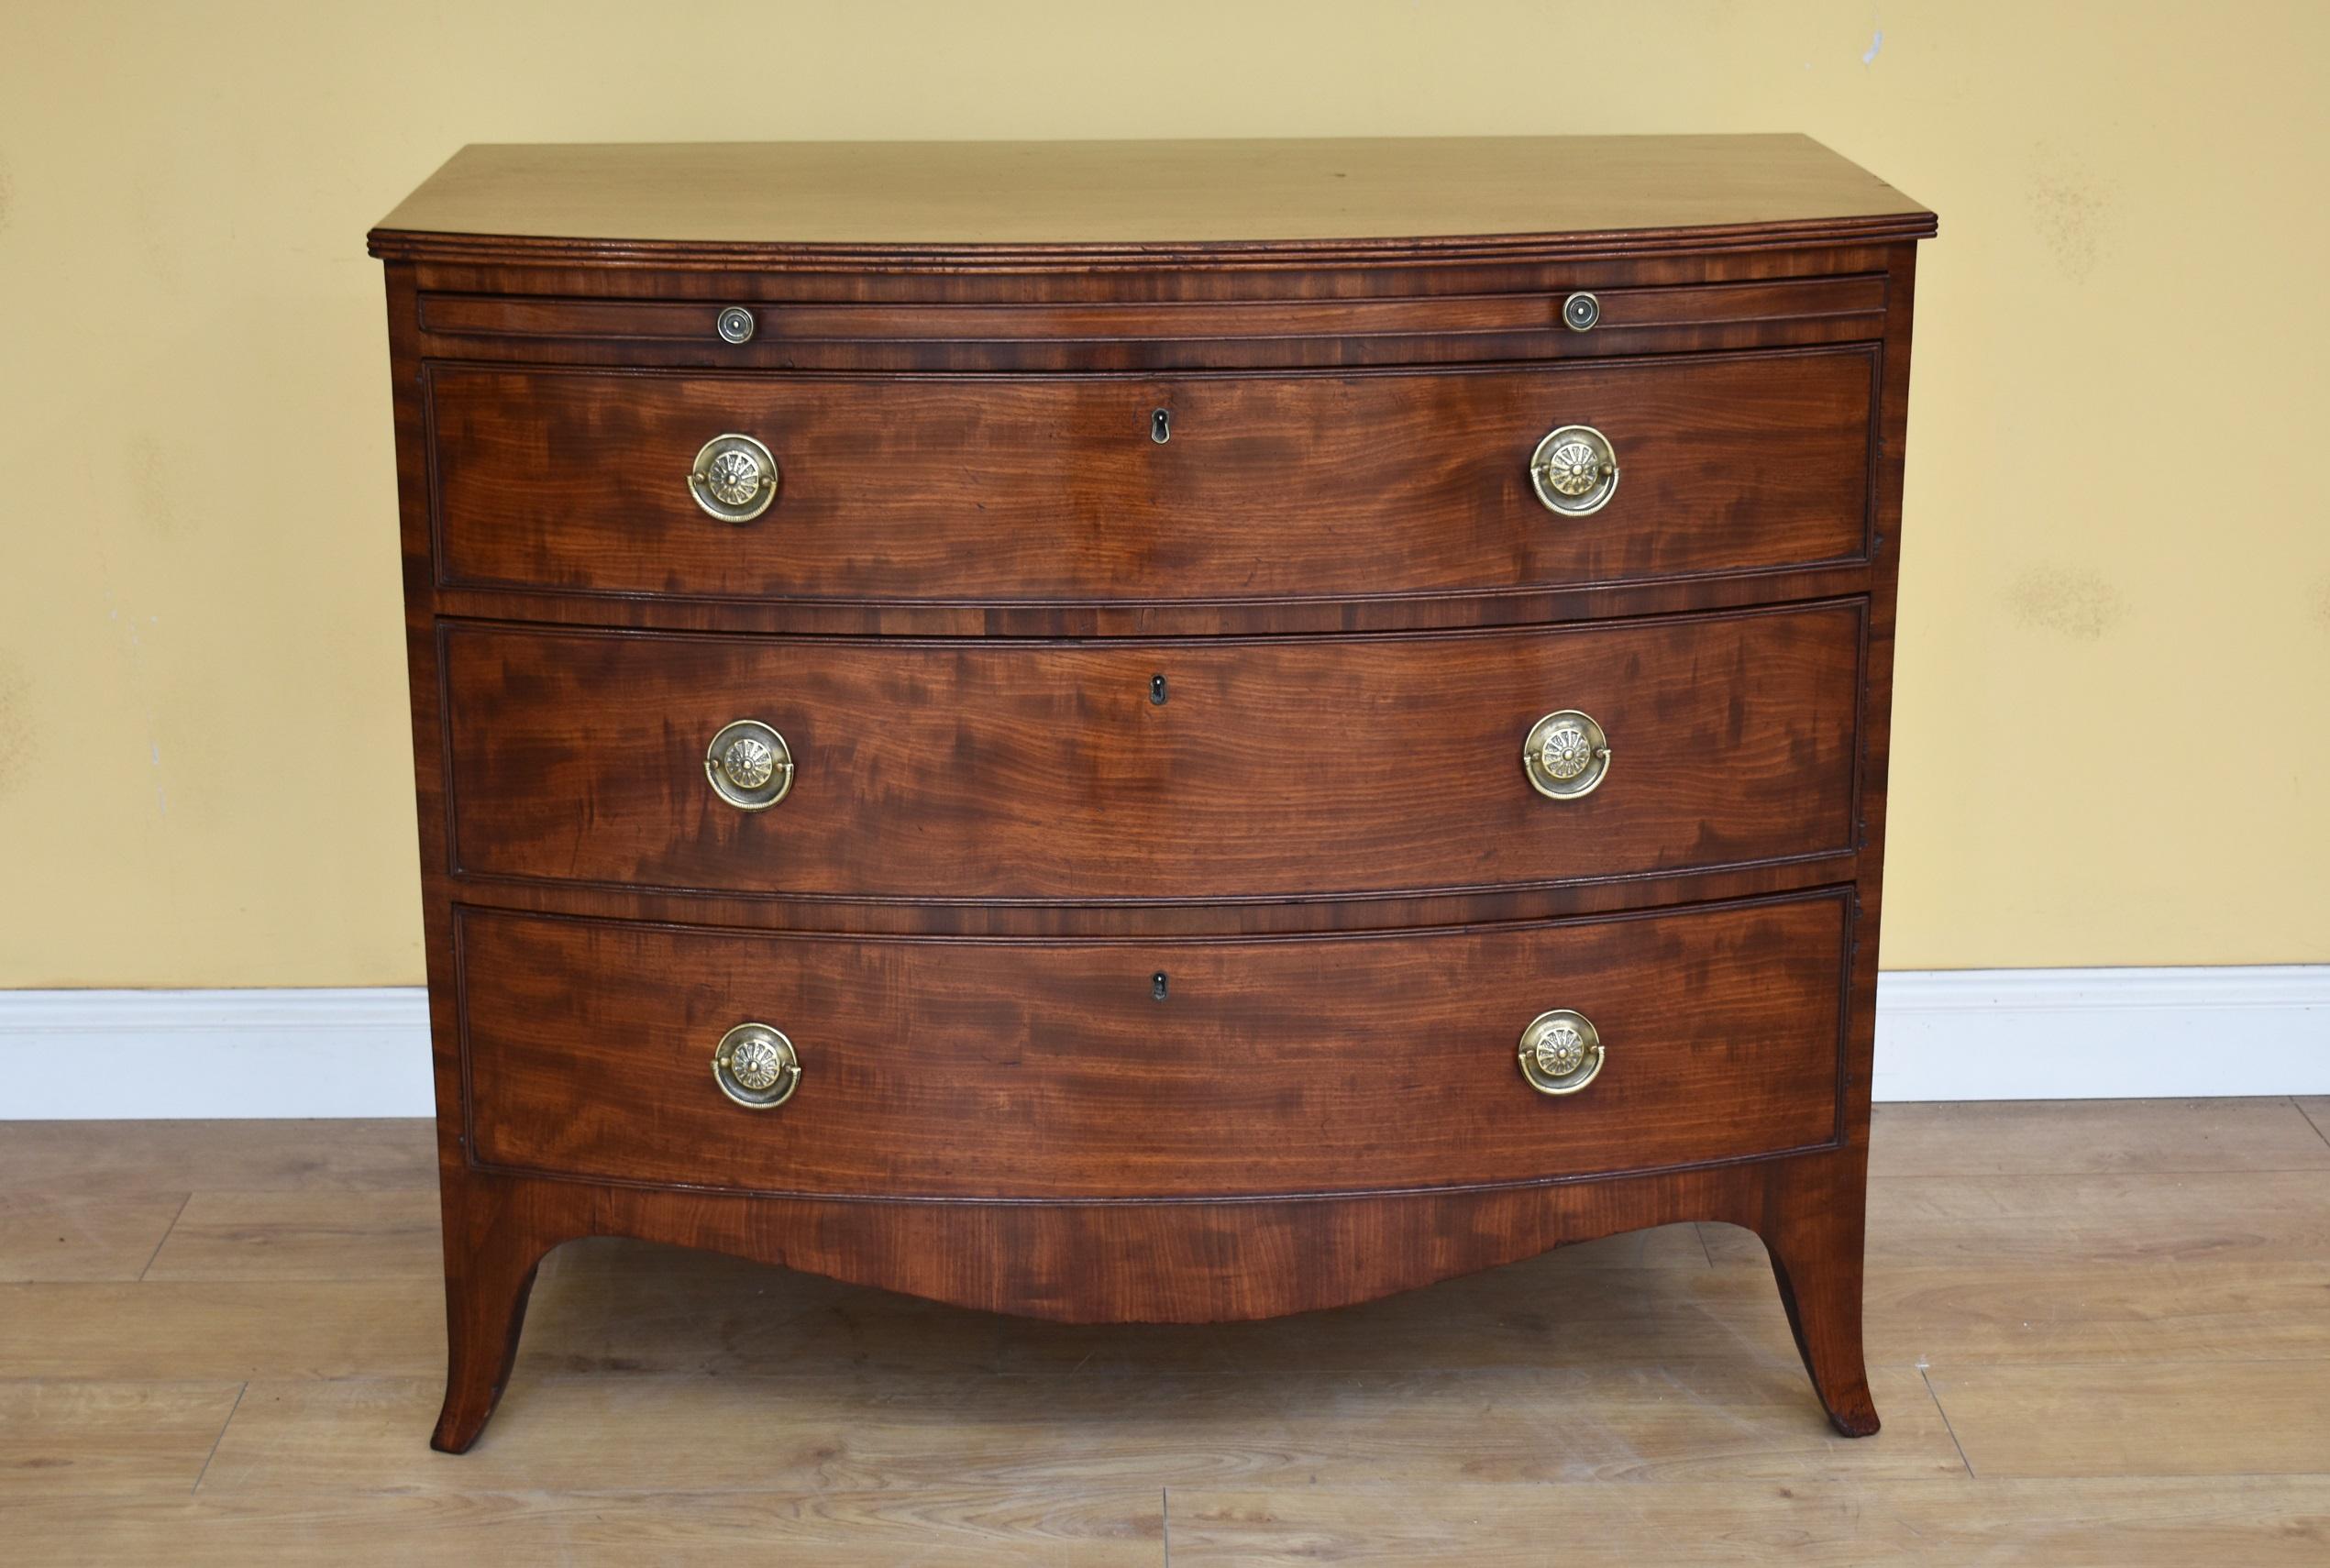 For sale is a top quality Regency mahogany bow front chest of drawers, the top being veneered in superb figured mahogany, with brushing slide below, having two brass handles. This is above three drawers, each with fine brass handles. The chest is